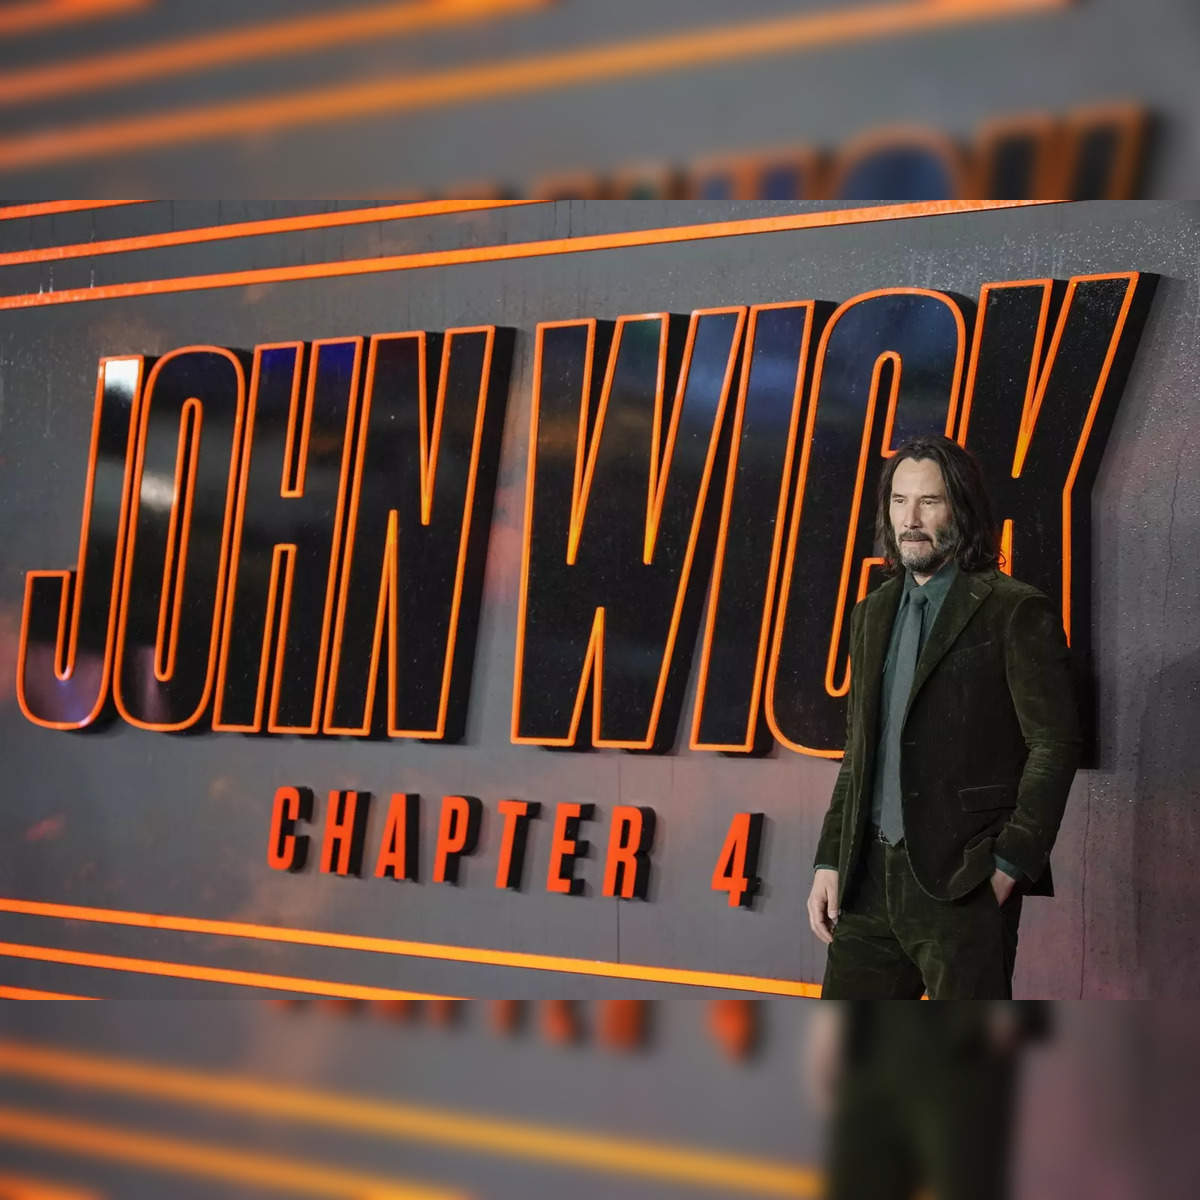 Where Is 'John Wick: Chapter 4' Available to Watch?